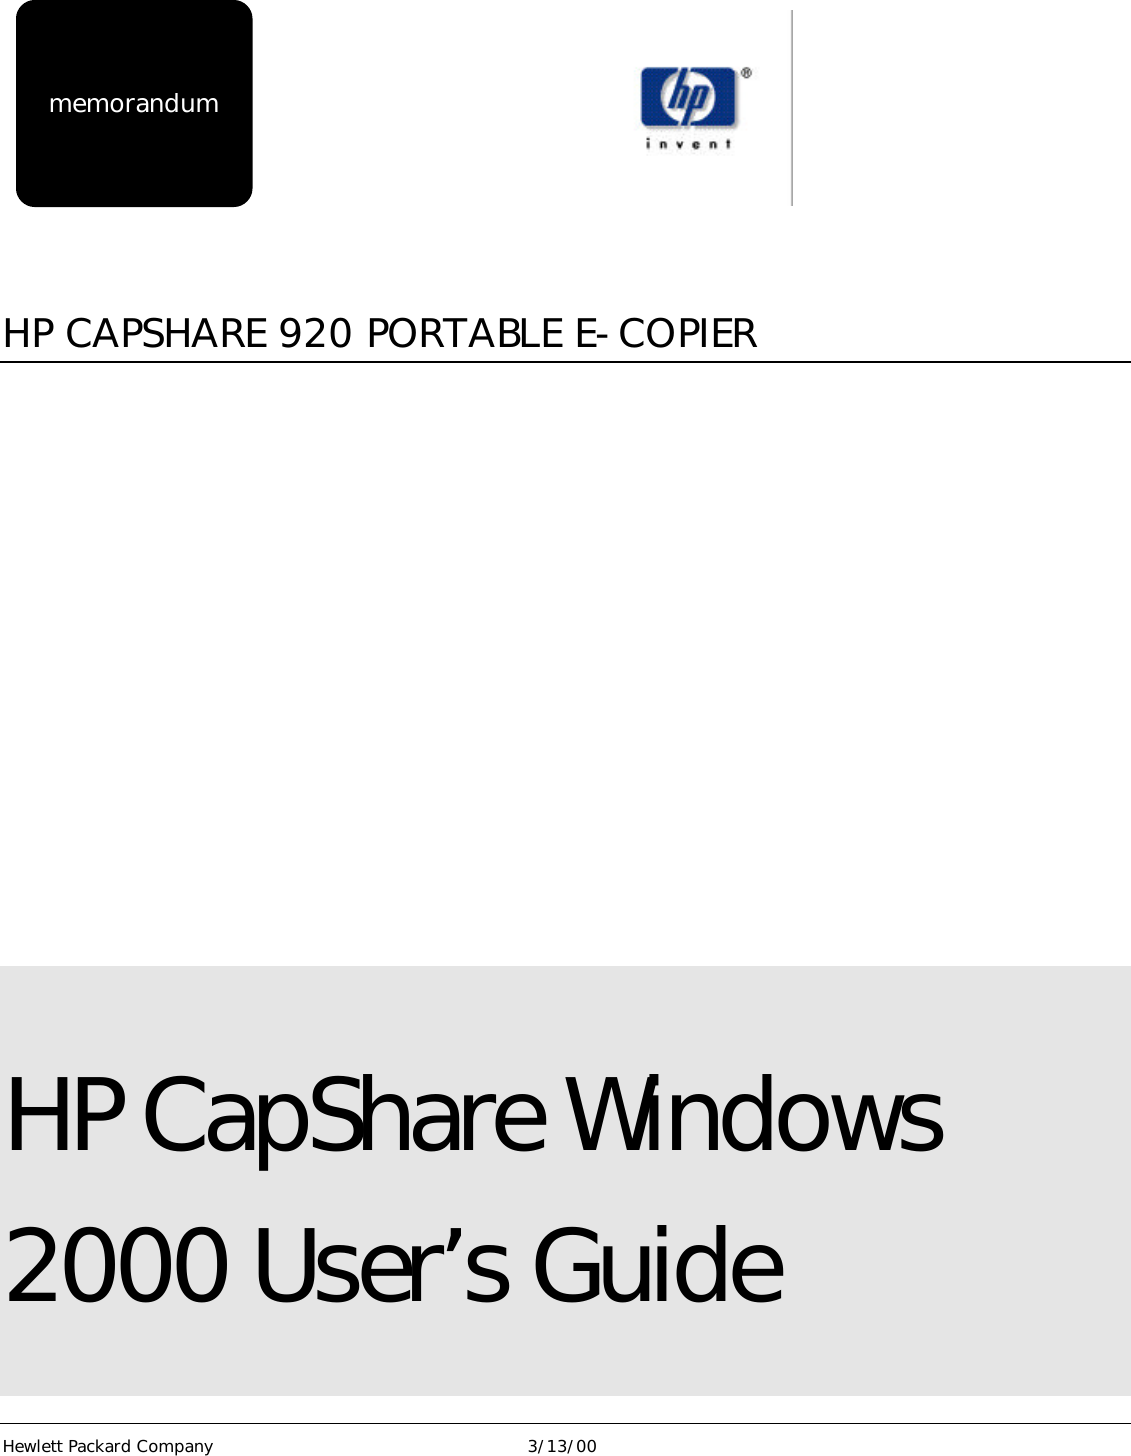 Page 1 of 9 - HP Win 2K Capshare User's Guide Cap Share 920 Portable E-Copier - Windows 2000 Guide, Not Orderable Bps80163